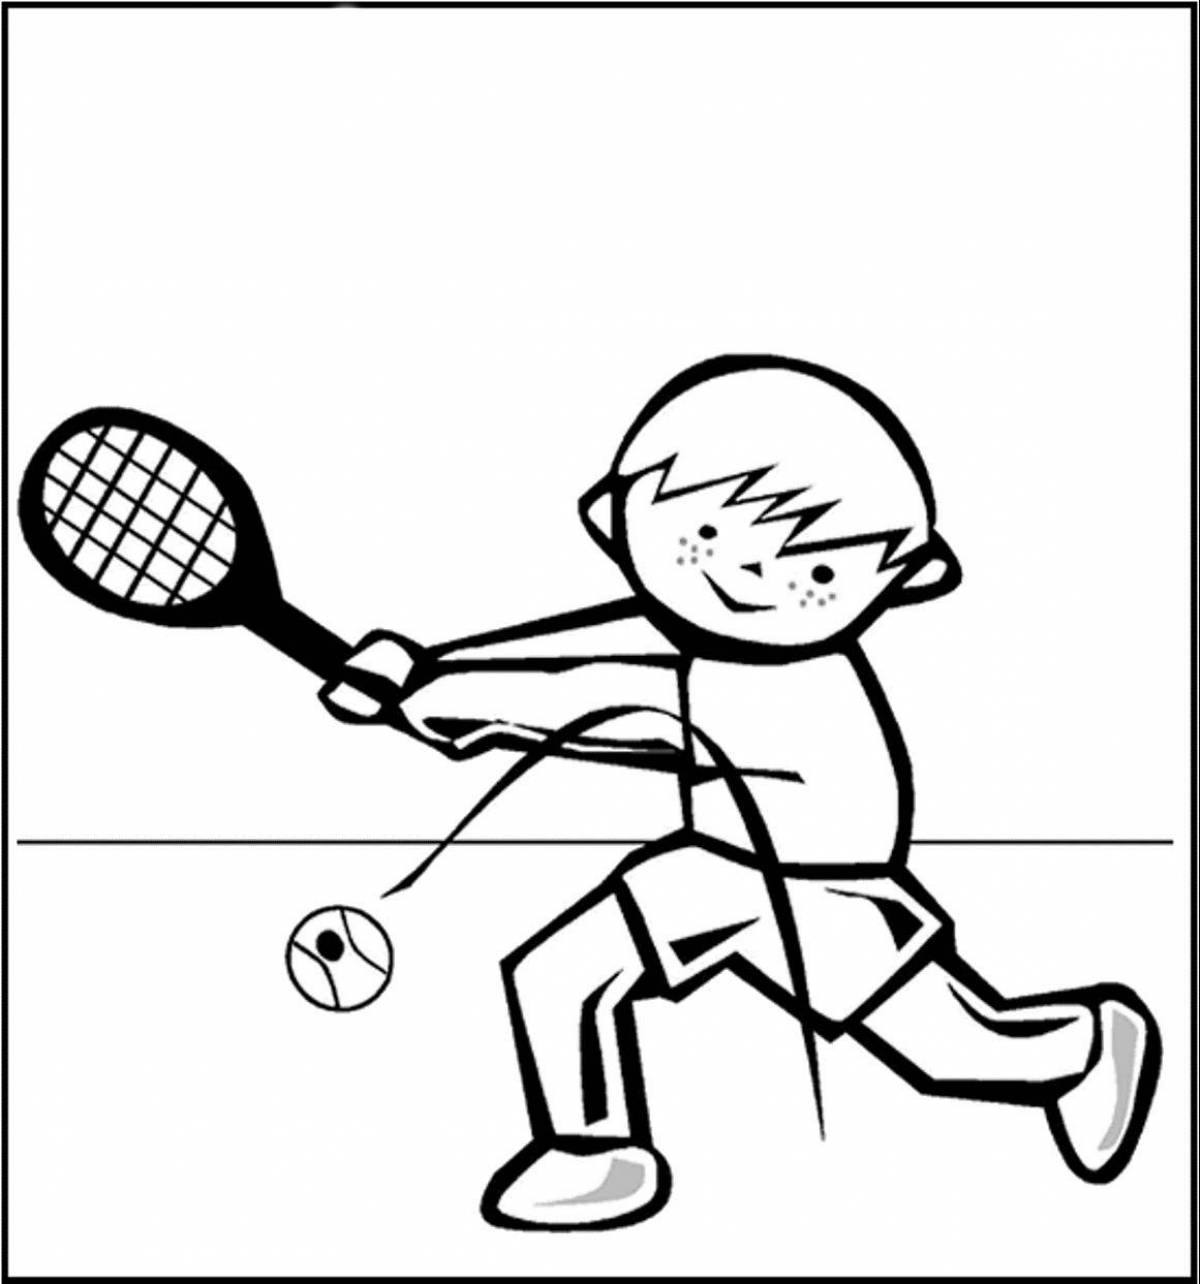 Colorful bright sports game coloring page